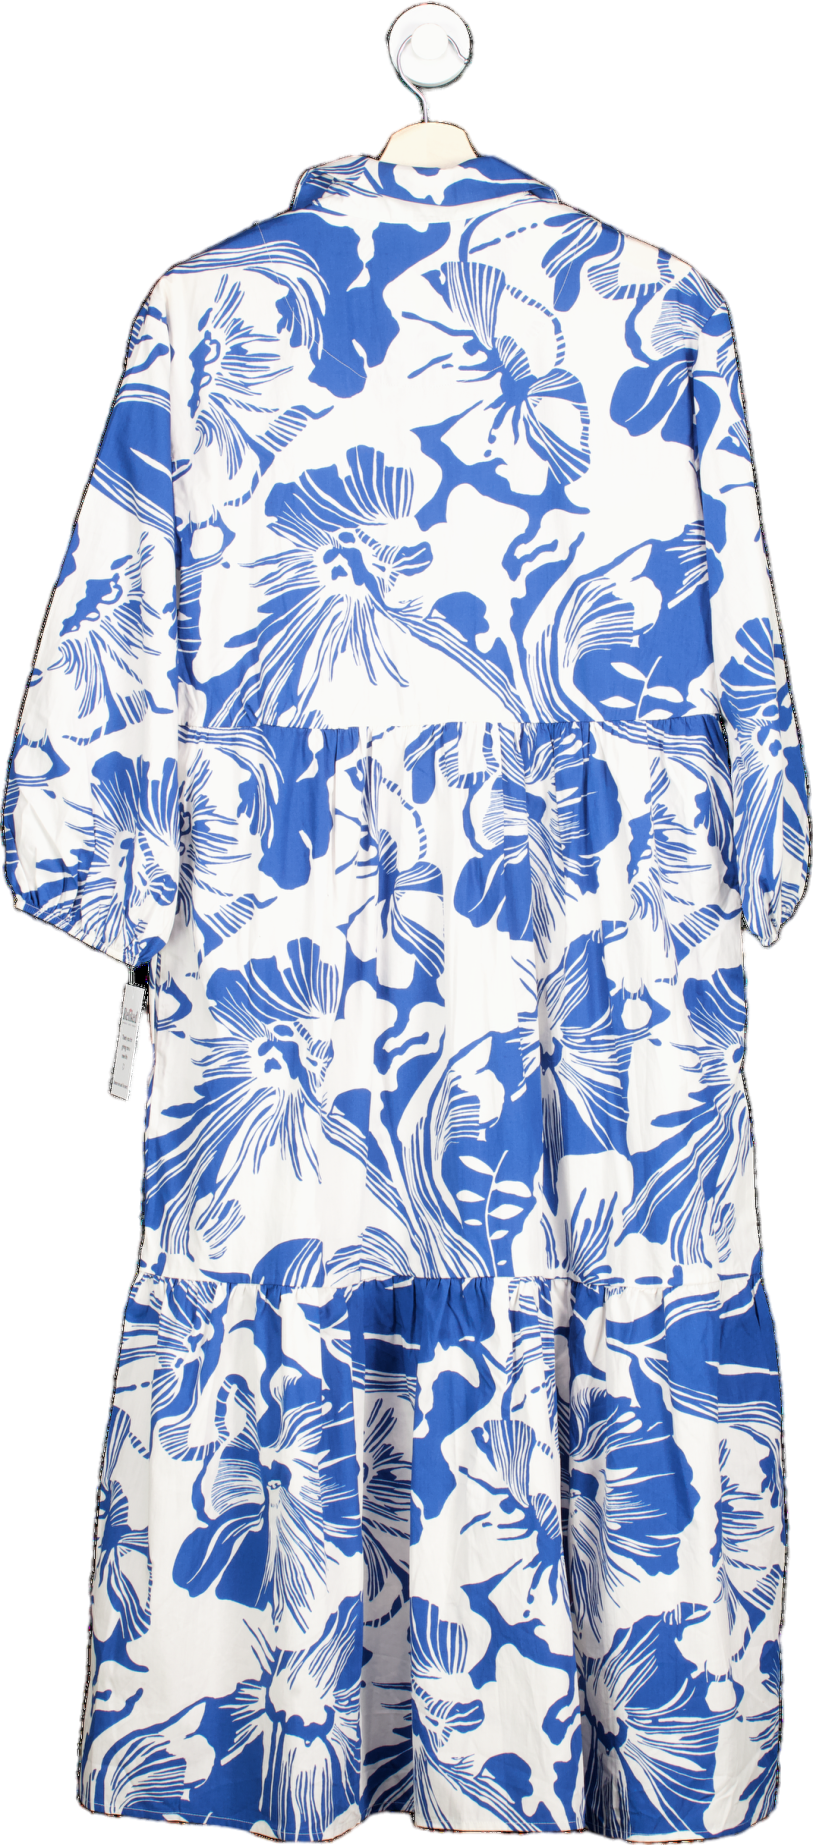 Maeve by Anthropologie Blue Floral Bettina Shirt Dress Small